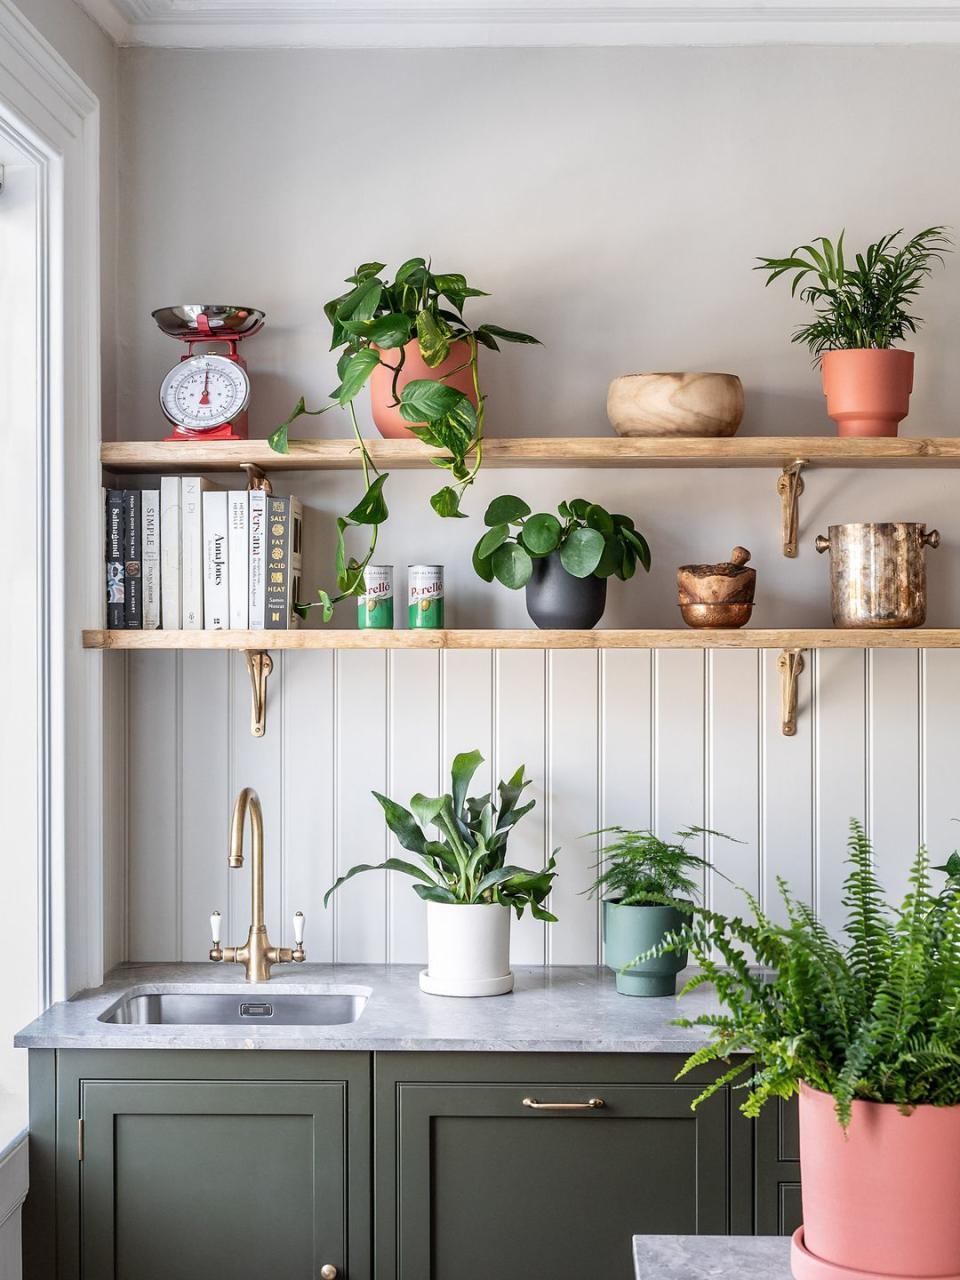 <p>As well as clever design tricks and storage solutions, you can simply introduce nature into your space by integrating aspects of the outdoors – <a href="https://www.housebeautiful.com/uk/garden/plants/a39927495/kitchen-plants/" rel="nofollow noopener" target="_blank" data-ylk="slk:plants" class="link ">plants</a> are an obvious one, as well as useful herbs like mint or sage. </p><p>Pictured: <a href="https://www.leafenvy.co.uk" rel="nofollow noopener" target="_blank" data-ylk="slk:Assorted plants at Plant Envy" class="link ">Assorted plants at Plant Envy</a></p>